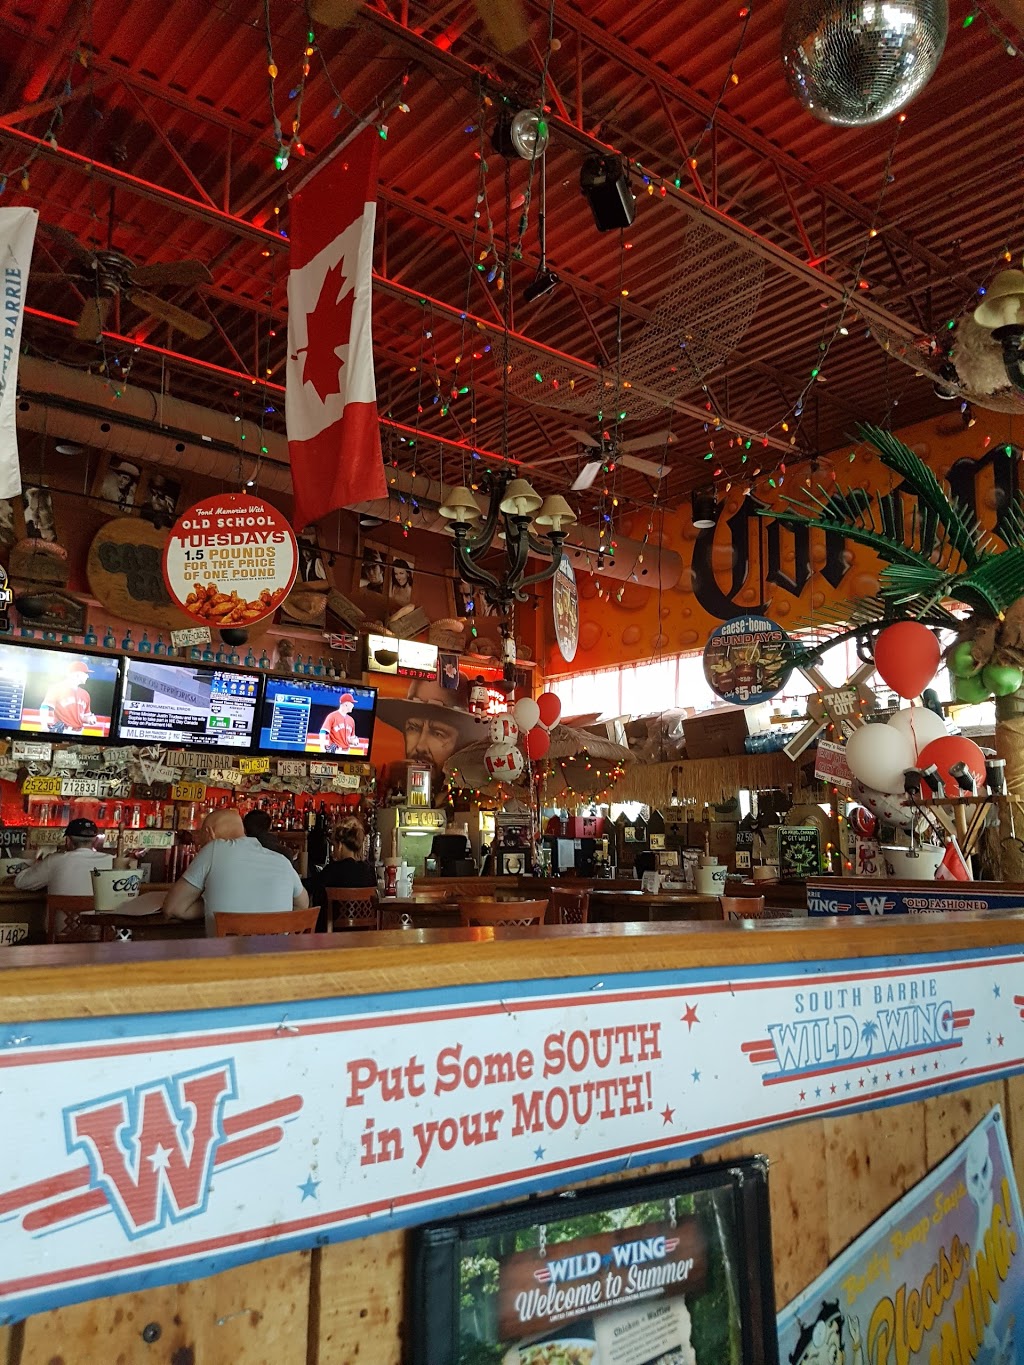 Wild Wing | 237 Mapleview Dr E, Barrie, ON L4N 0W5, Canada | Phone: (705) 722-6090